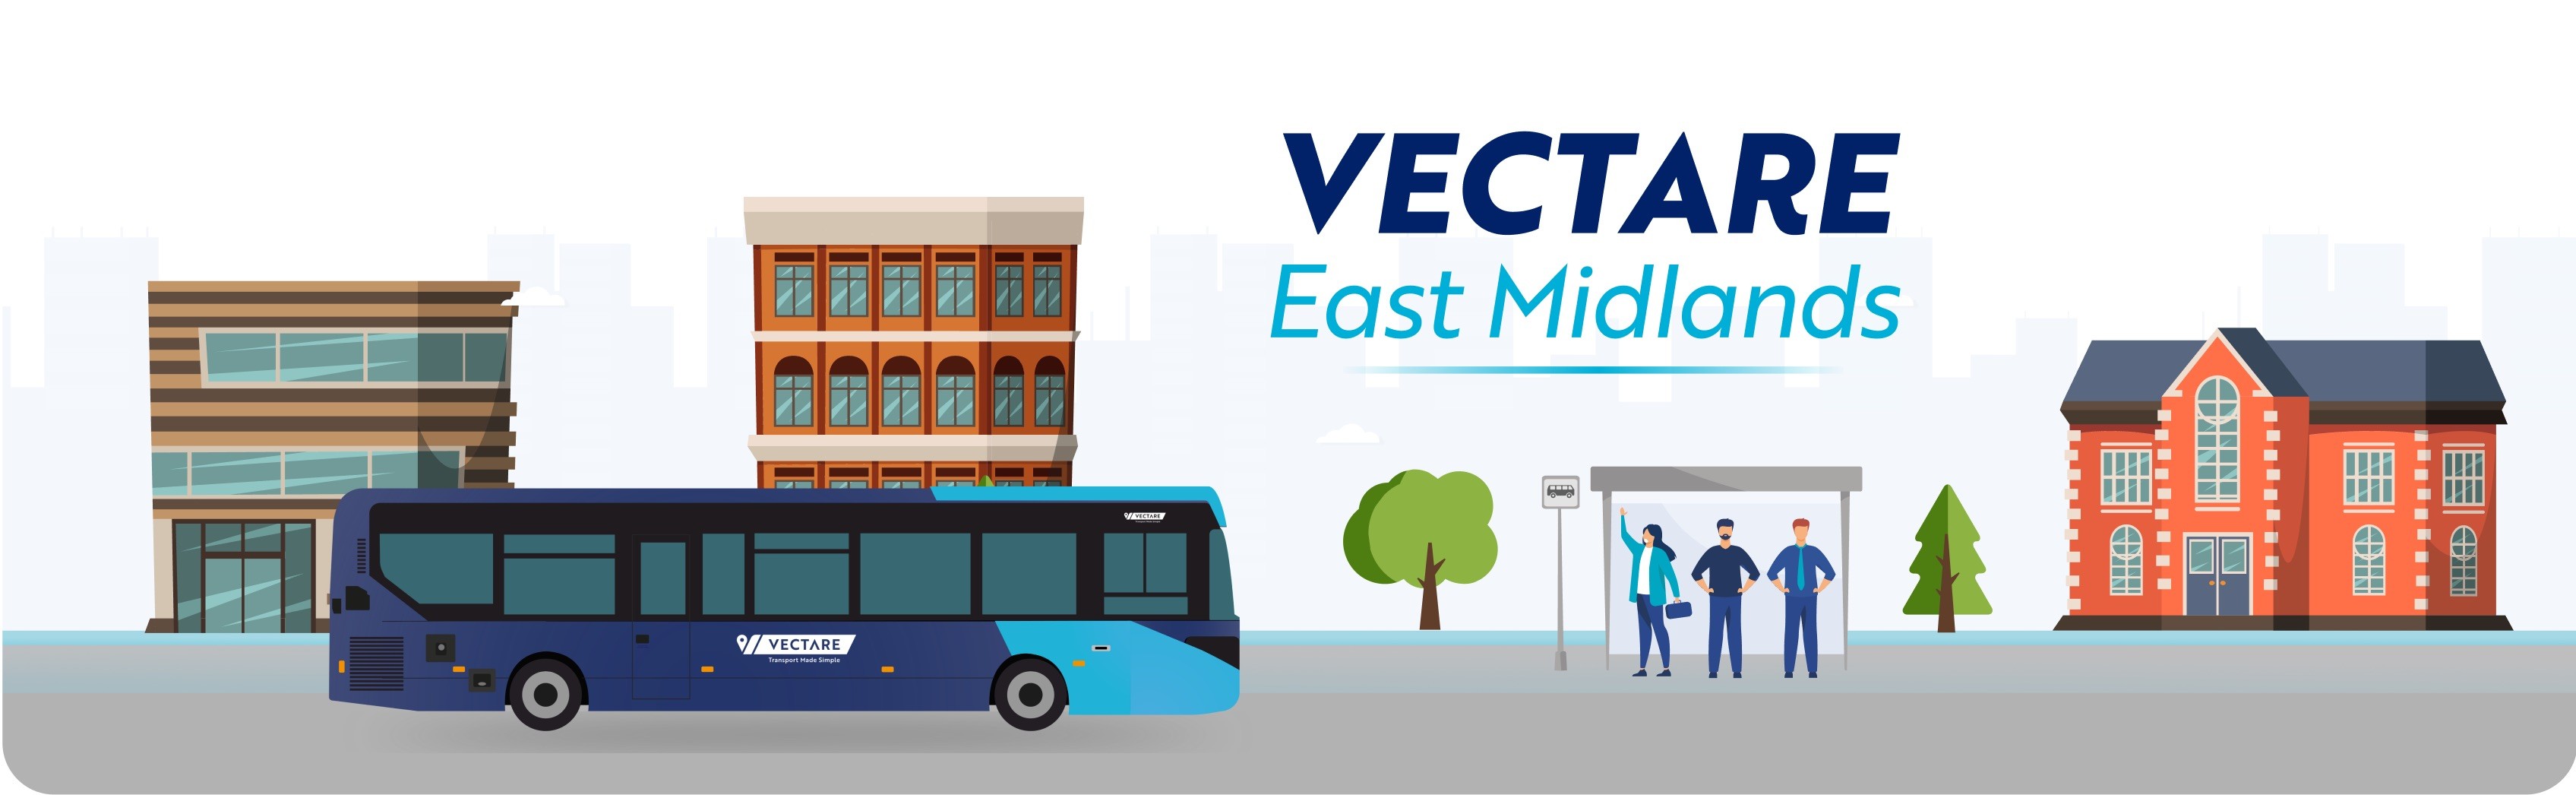 Vectare East Midlands